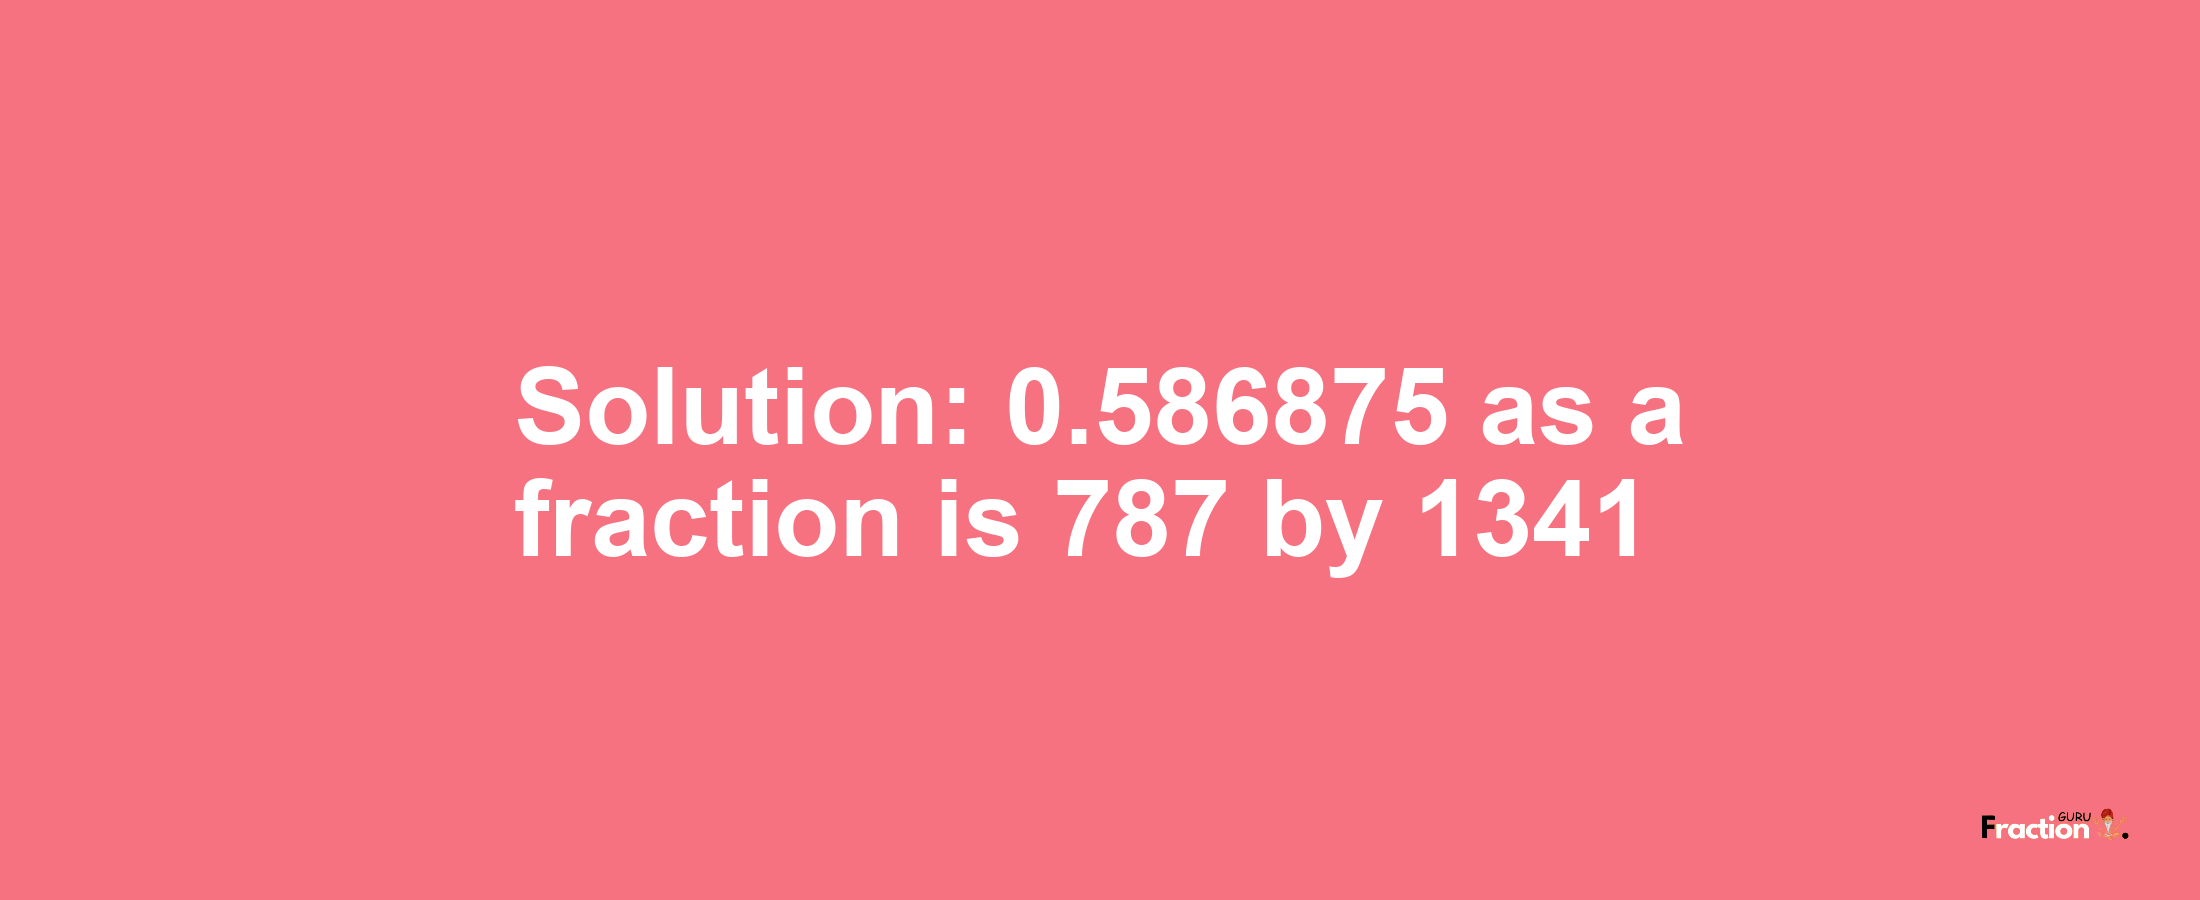 Solution:0.586875 as a fraction is 787/1341